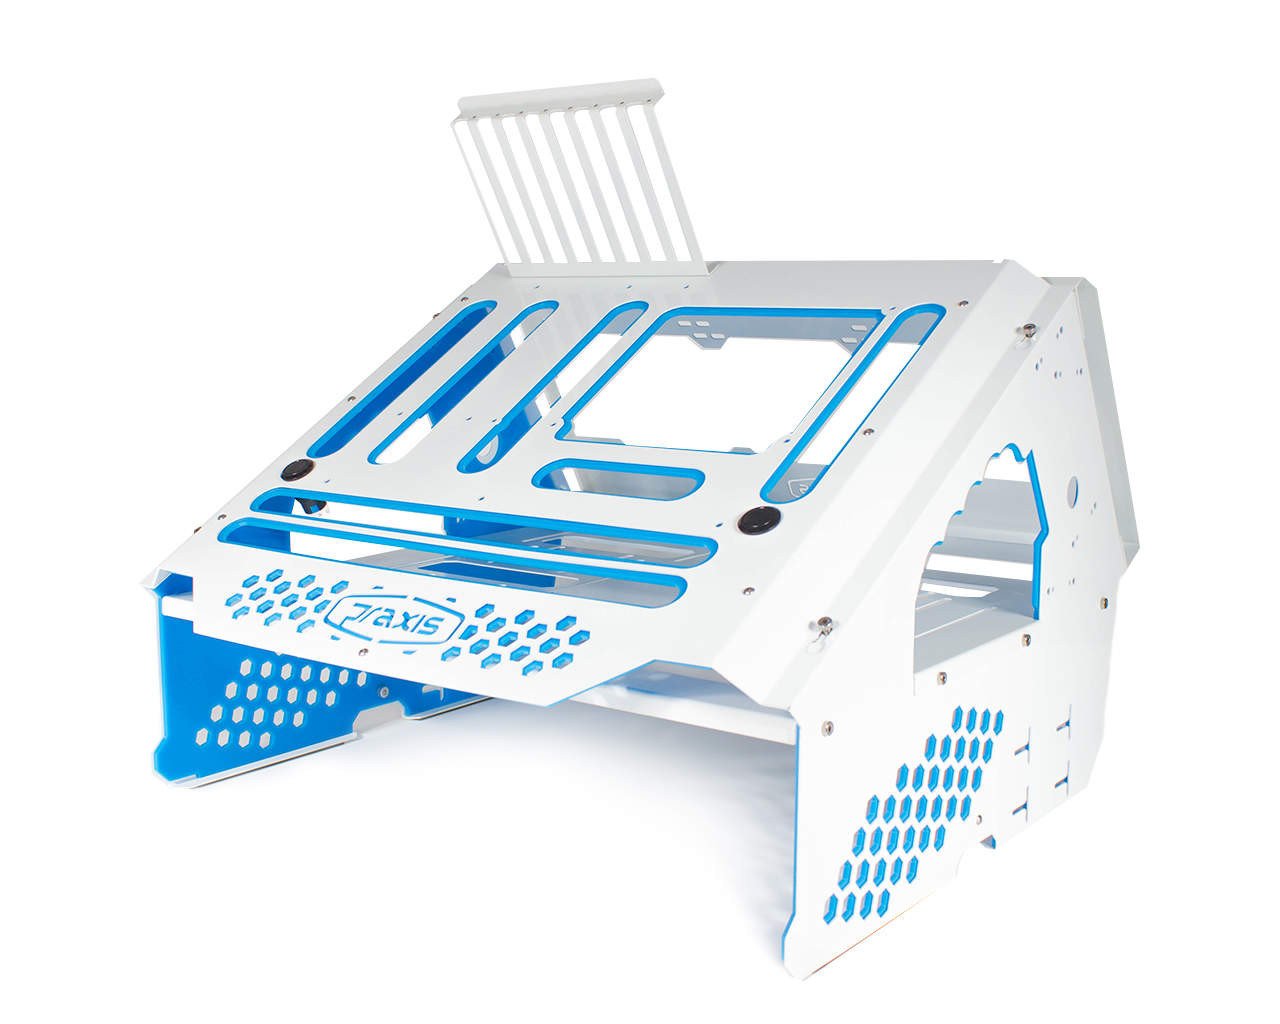 Praxis WetBench - PrimoChill - KEEPING IT COOL White w/Solid Light Blue Accents